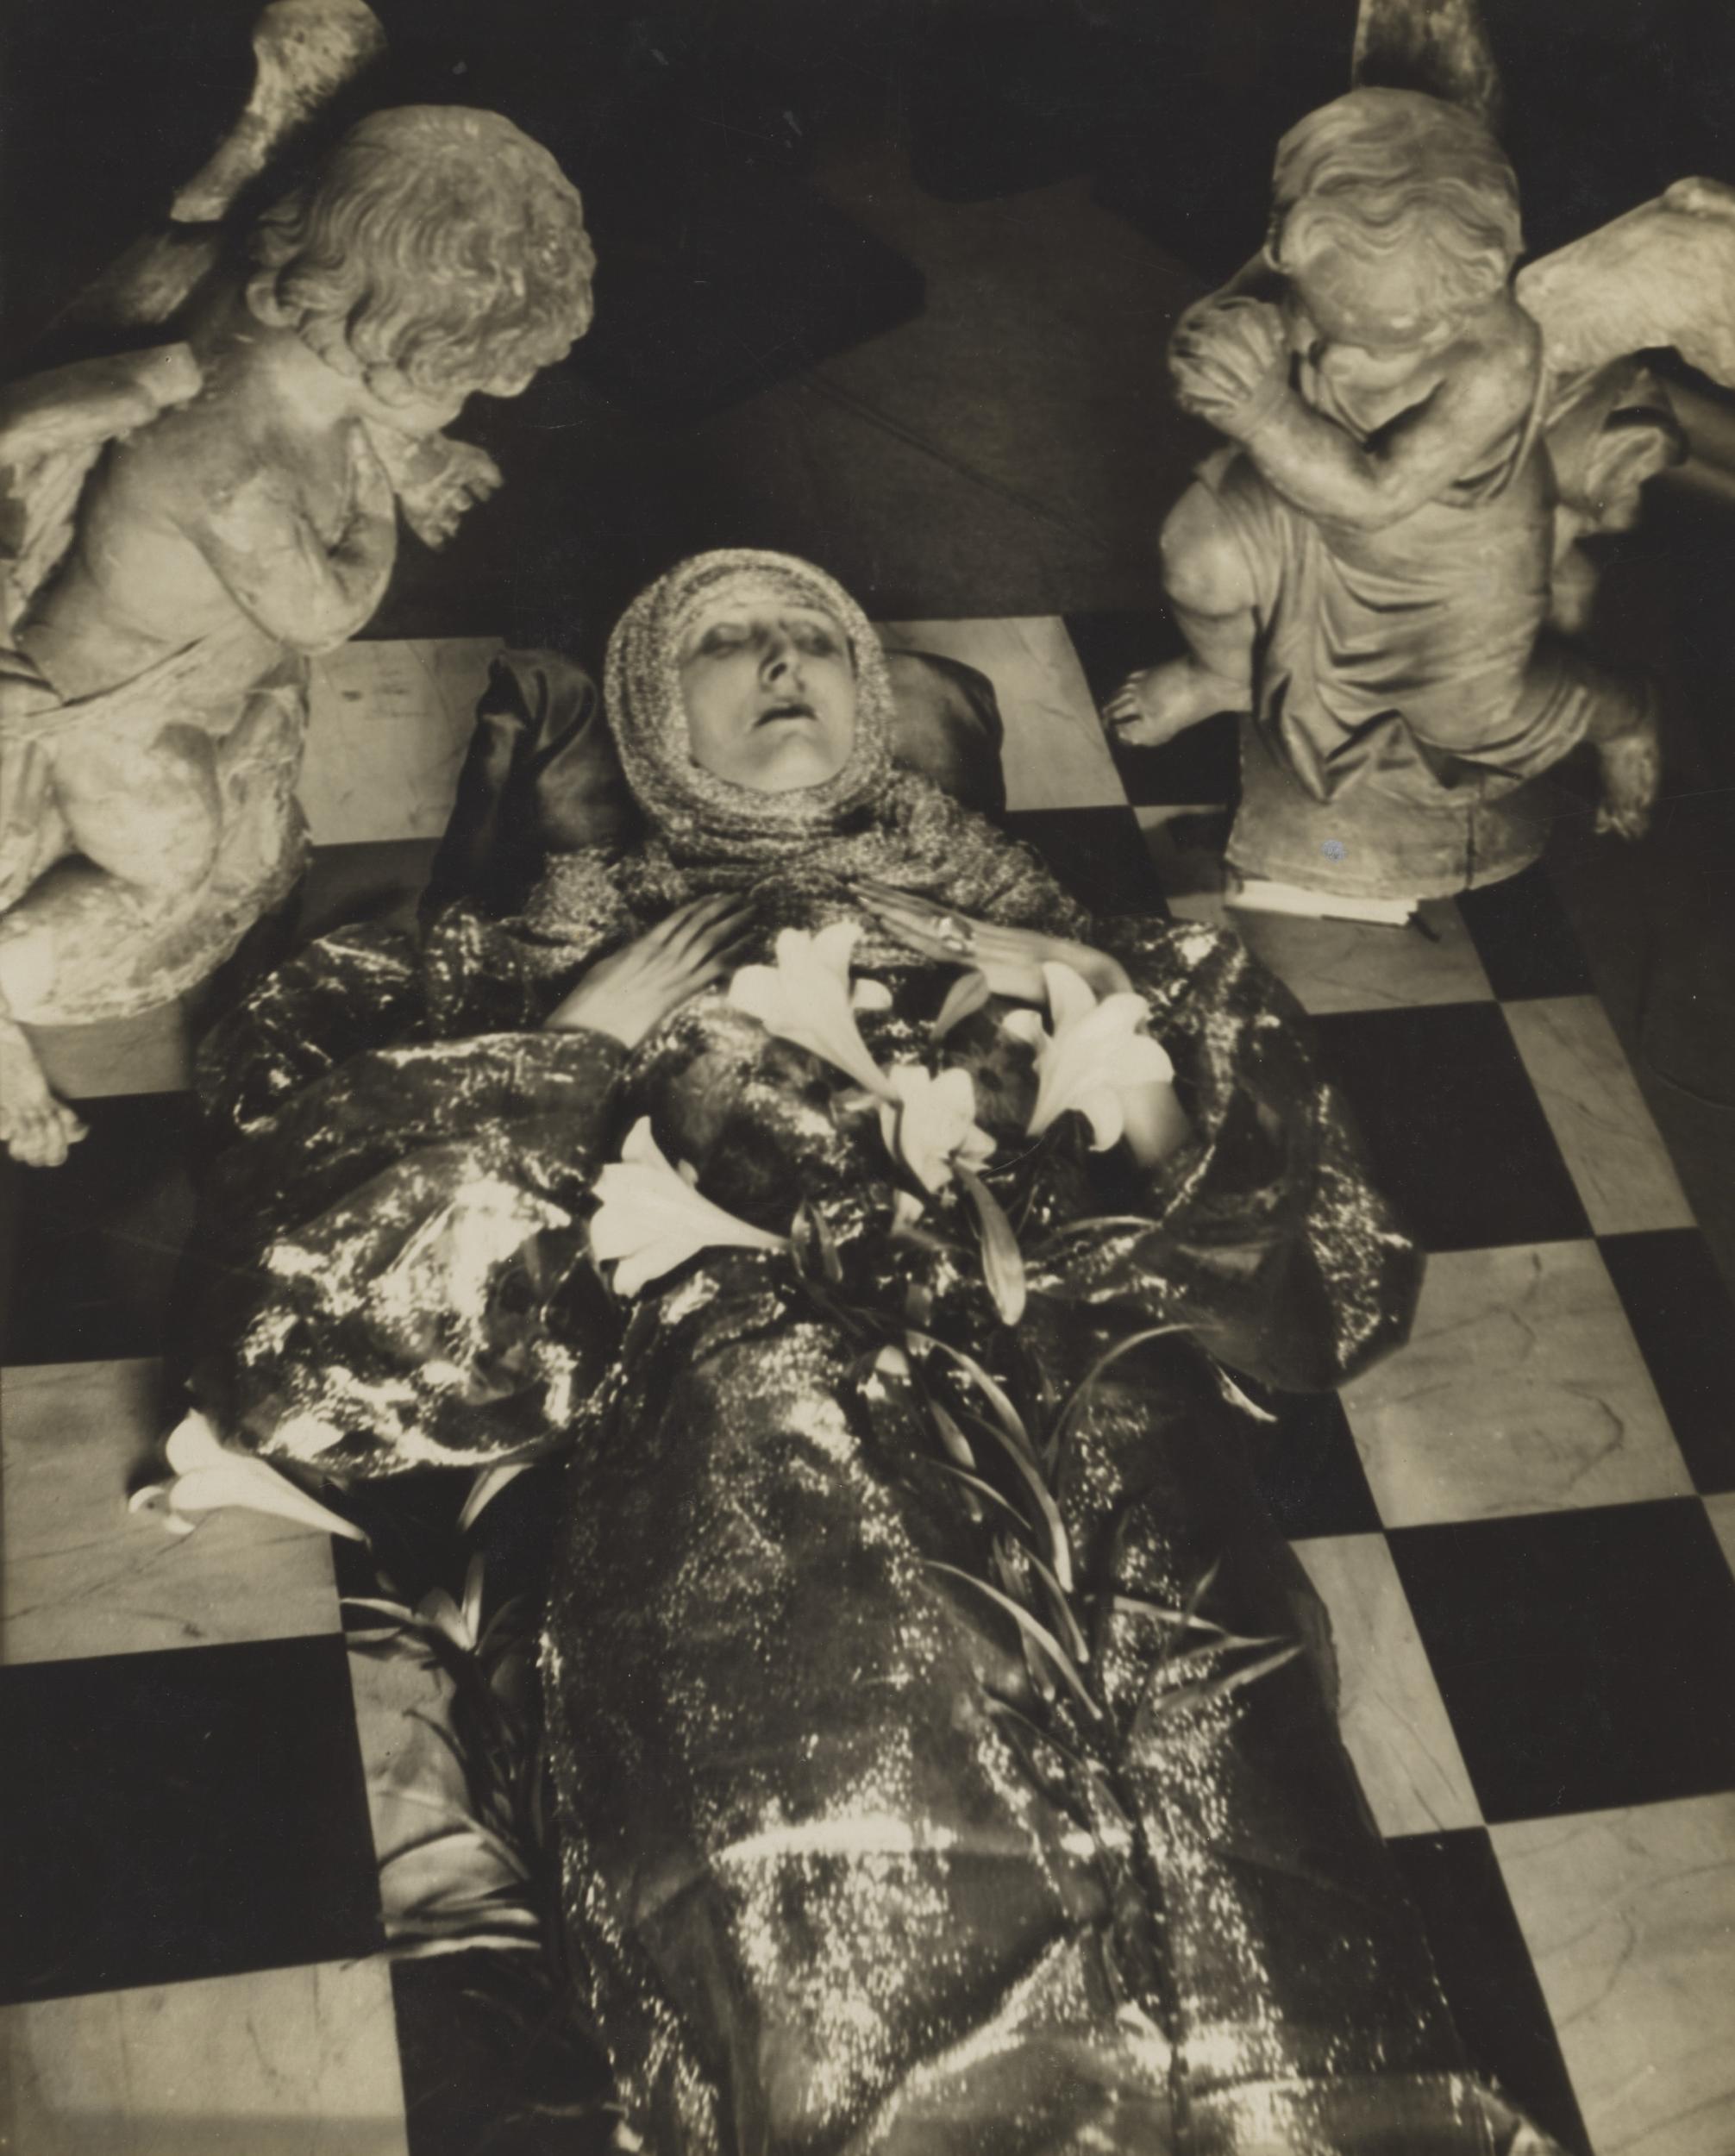 Edith Sitwell at Sussex Gardens by Cecil Beaton, 1926